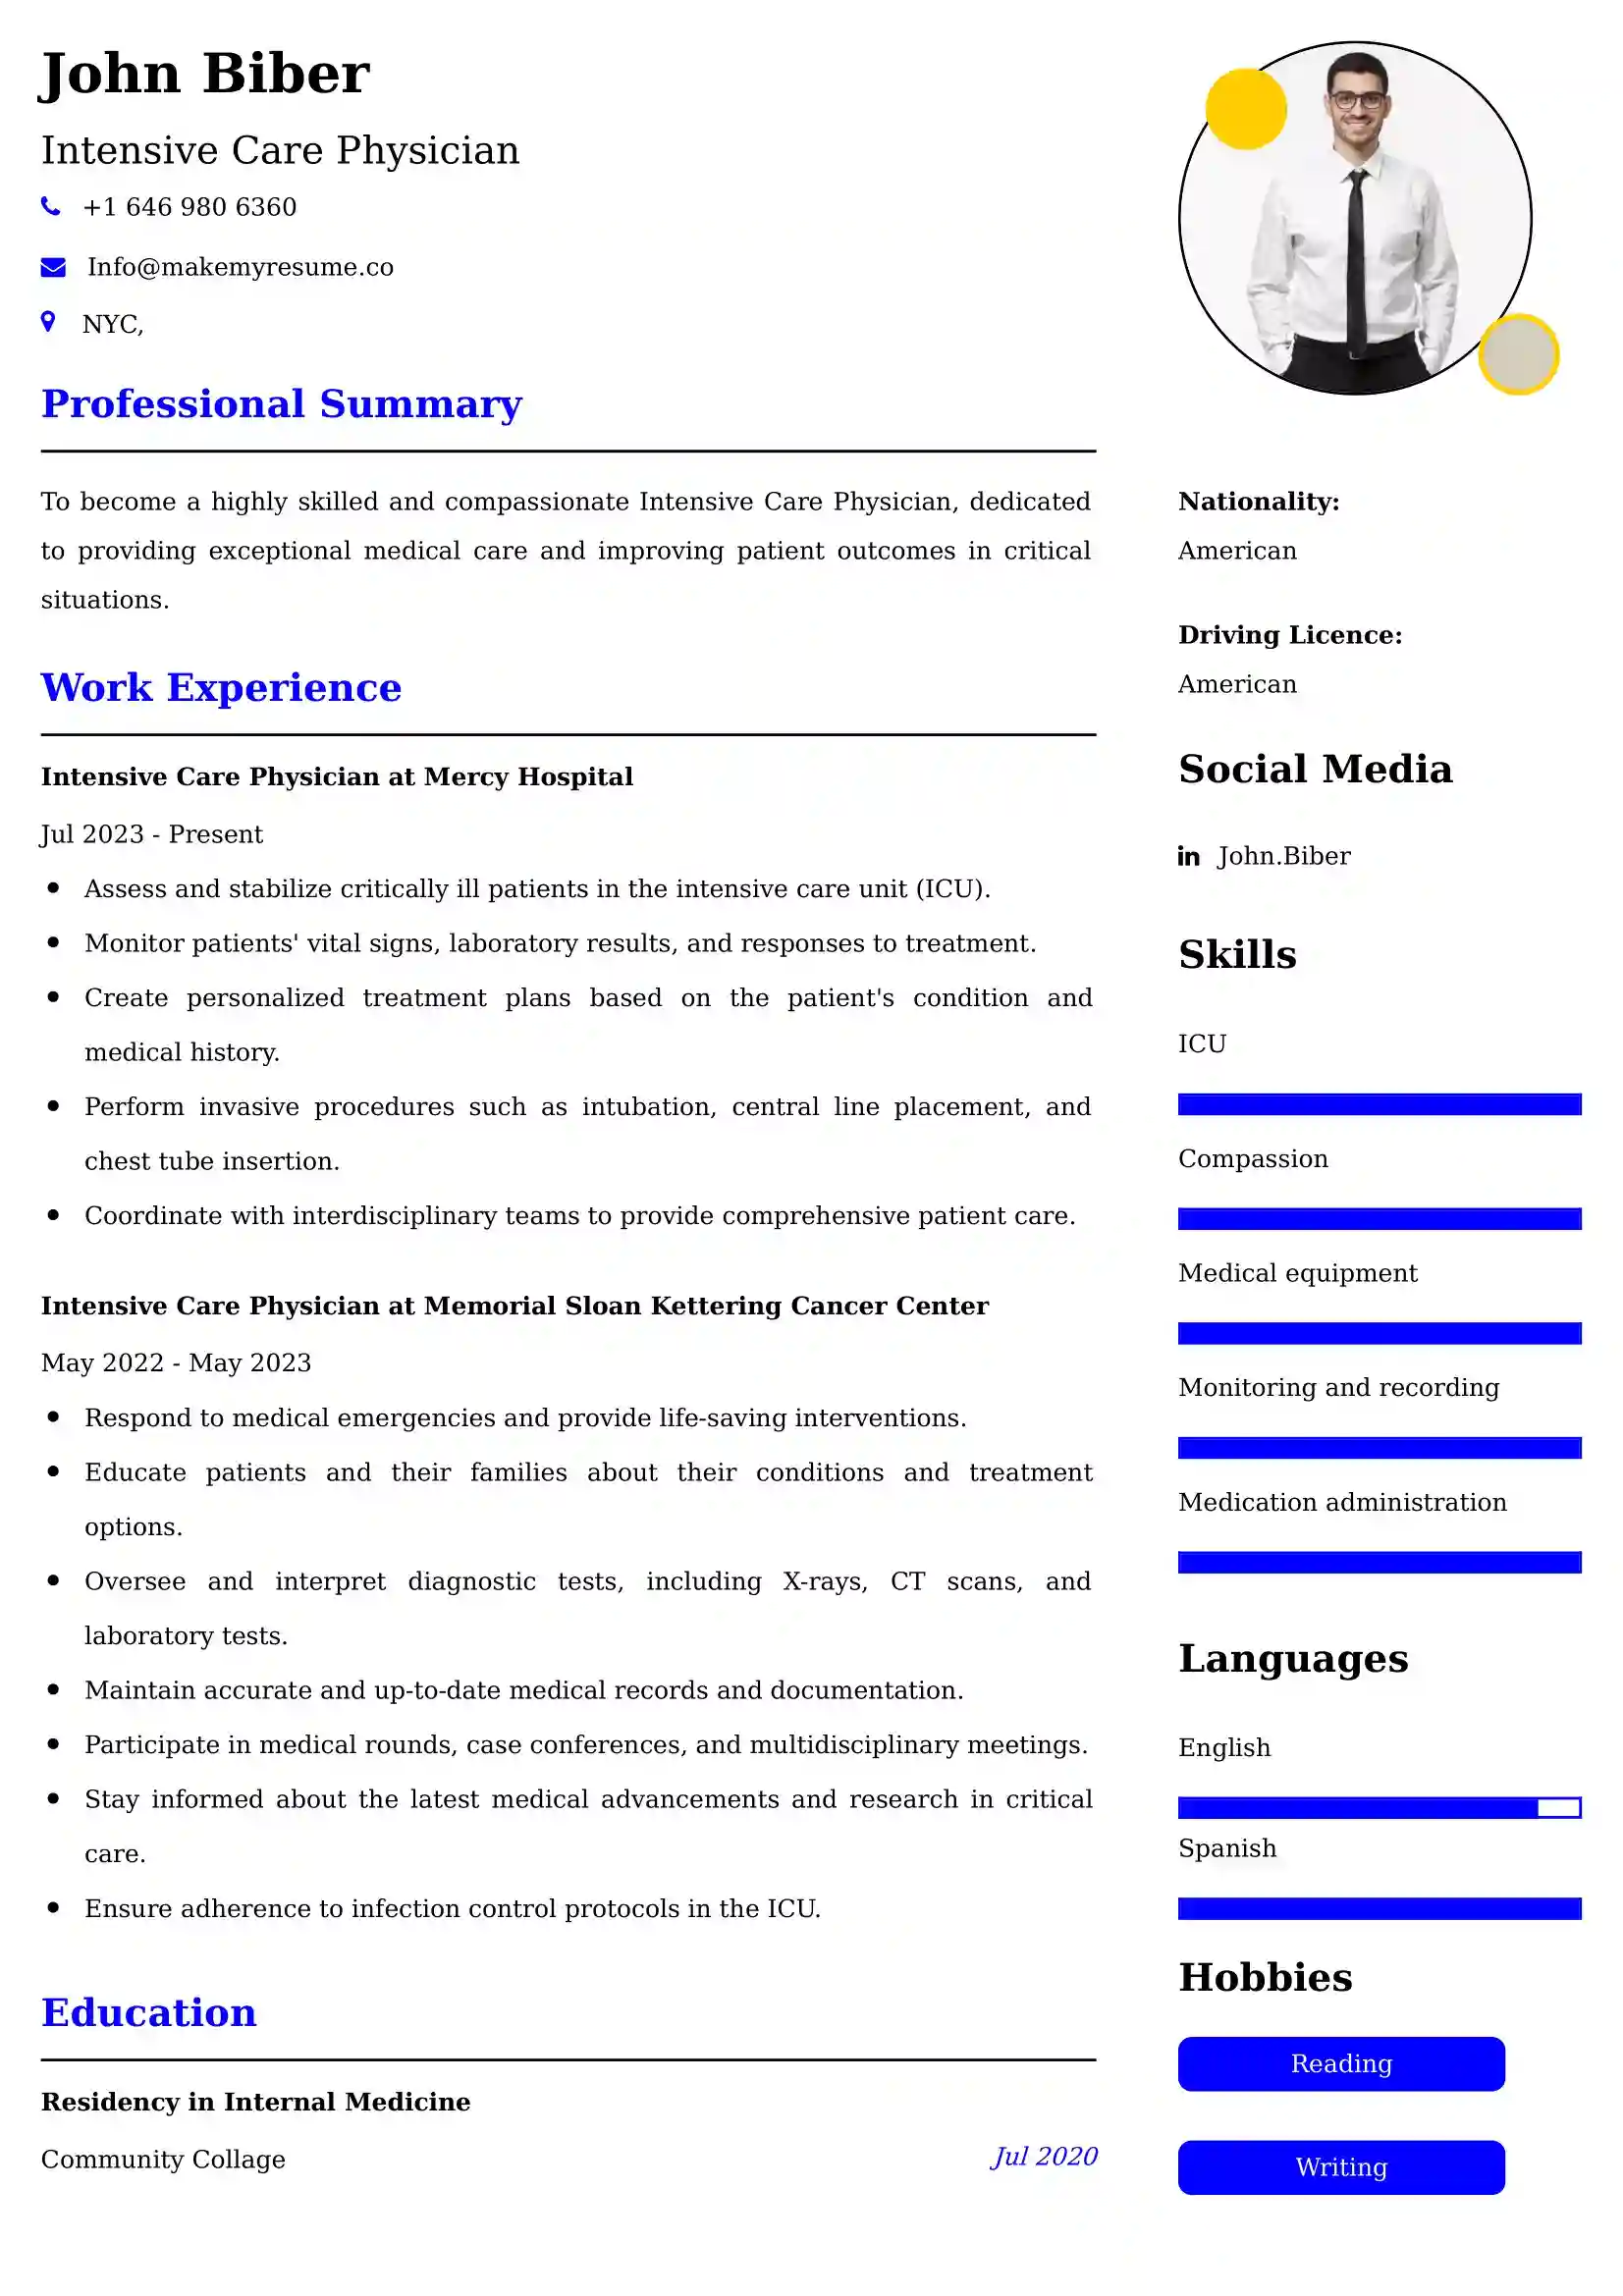 Intensive Care Physician CV Examples - US Format